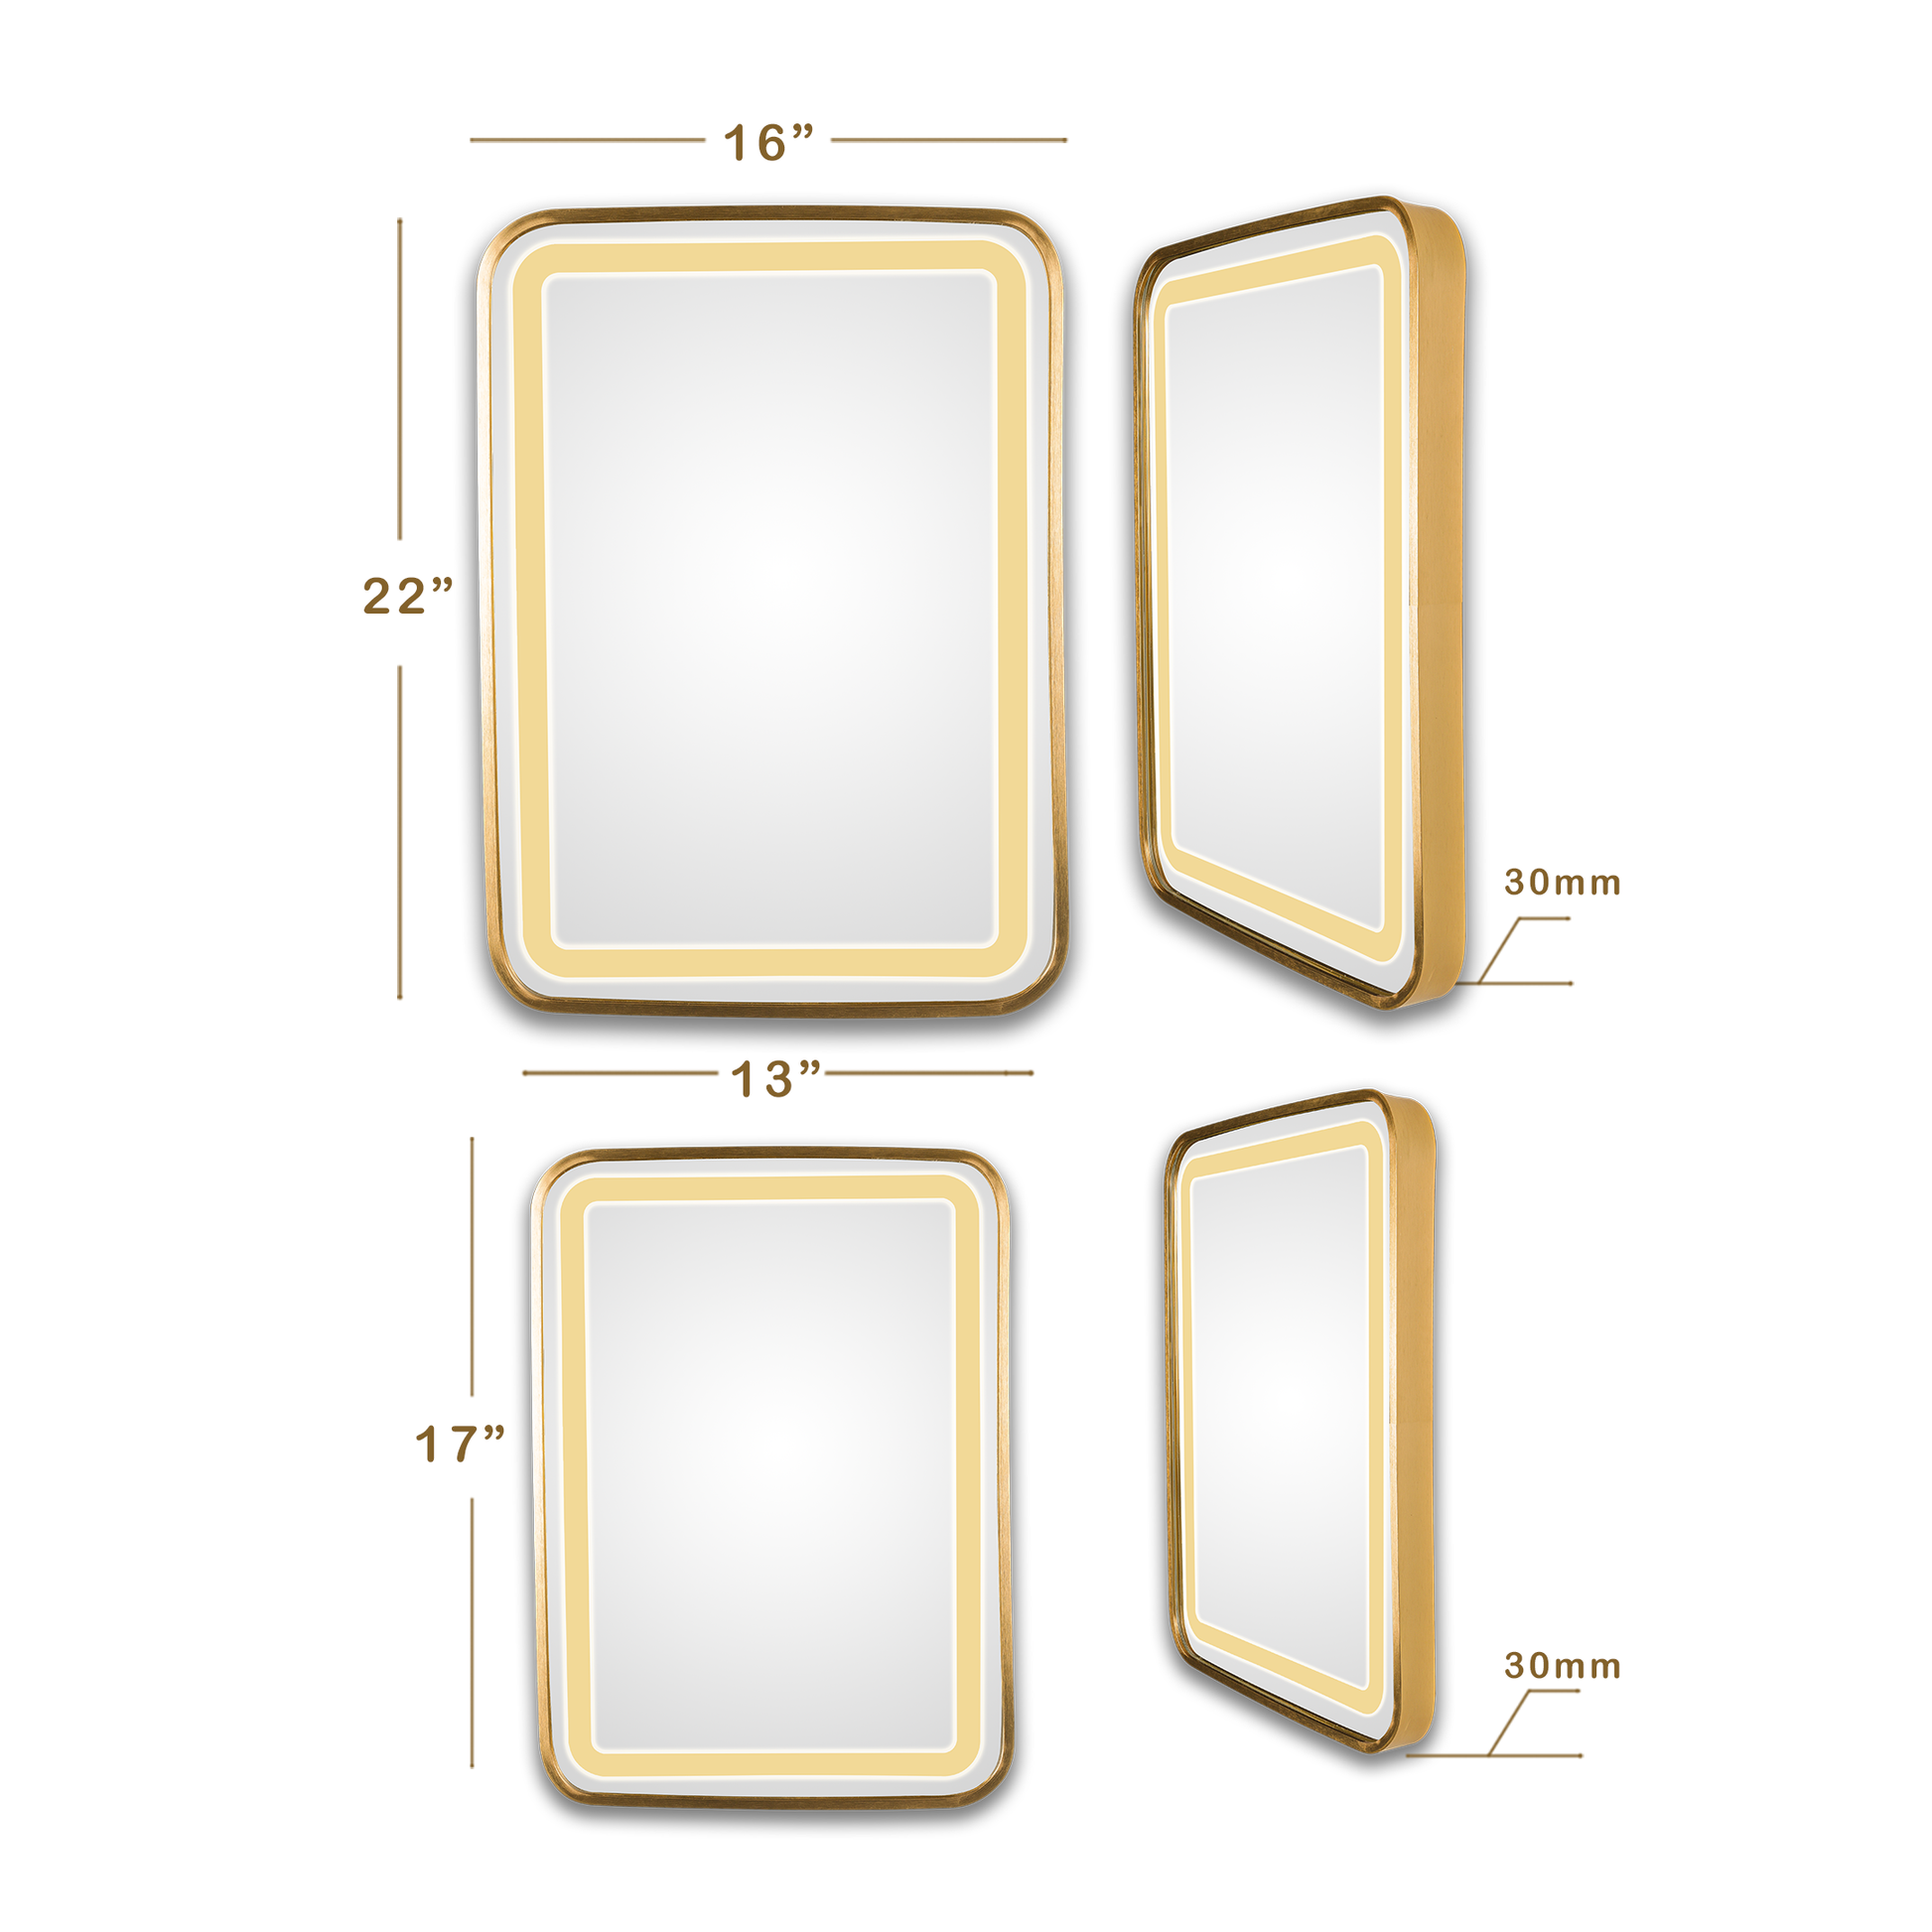 ee253da8-8726-43a6-9b41-27fdcb3bdc02/Rectangle_vertical_30_gold_dimensions.png